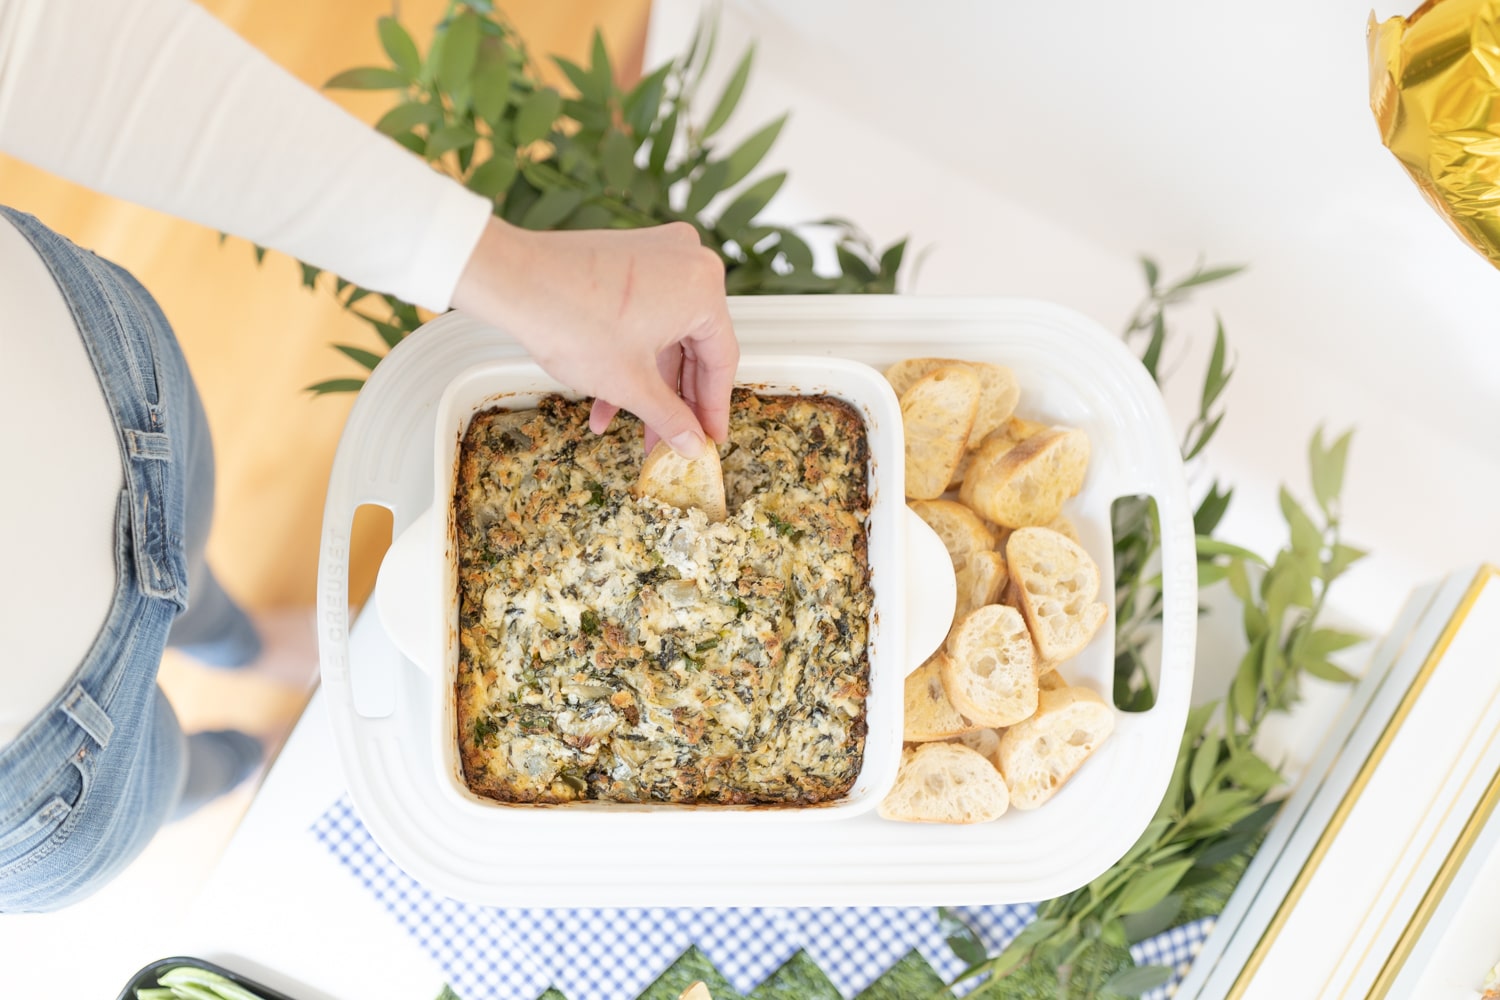 Best baked spinach artichoke dip recipe by blogger Stephanie Ziajka on Diary of a Debutante